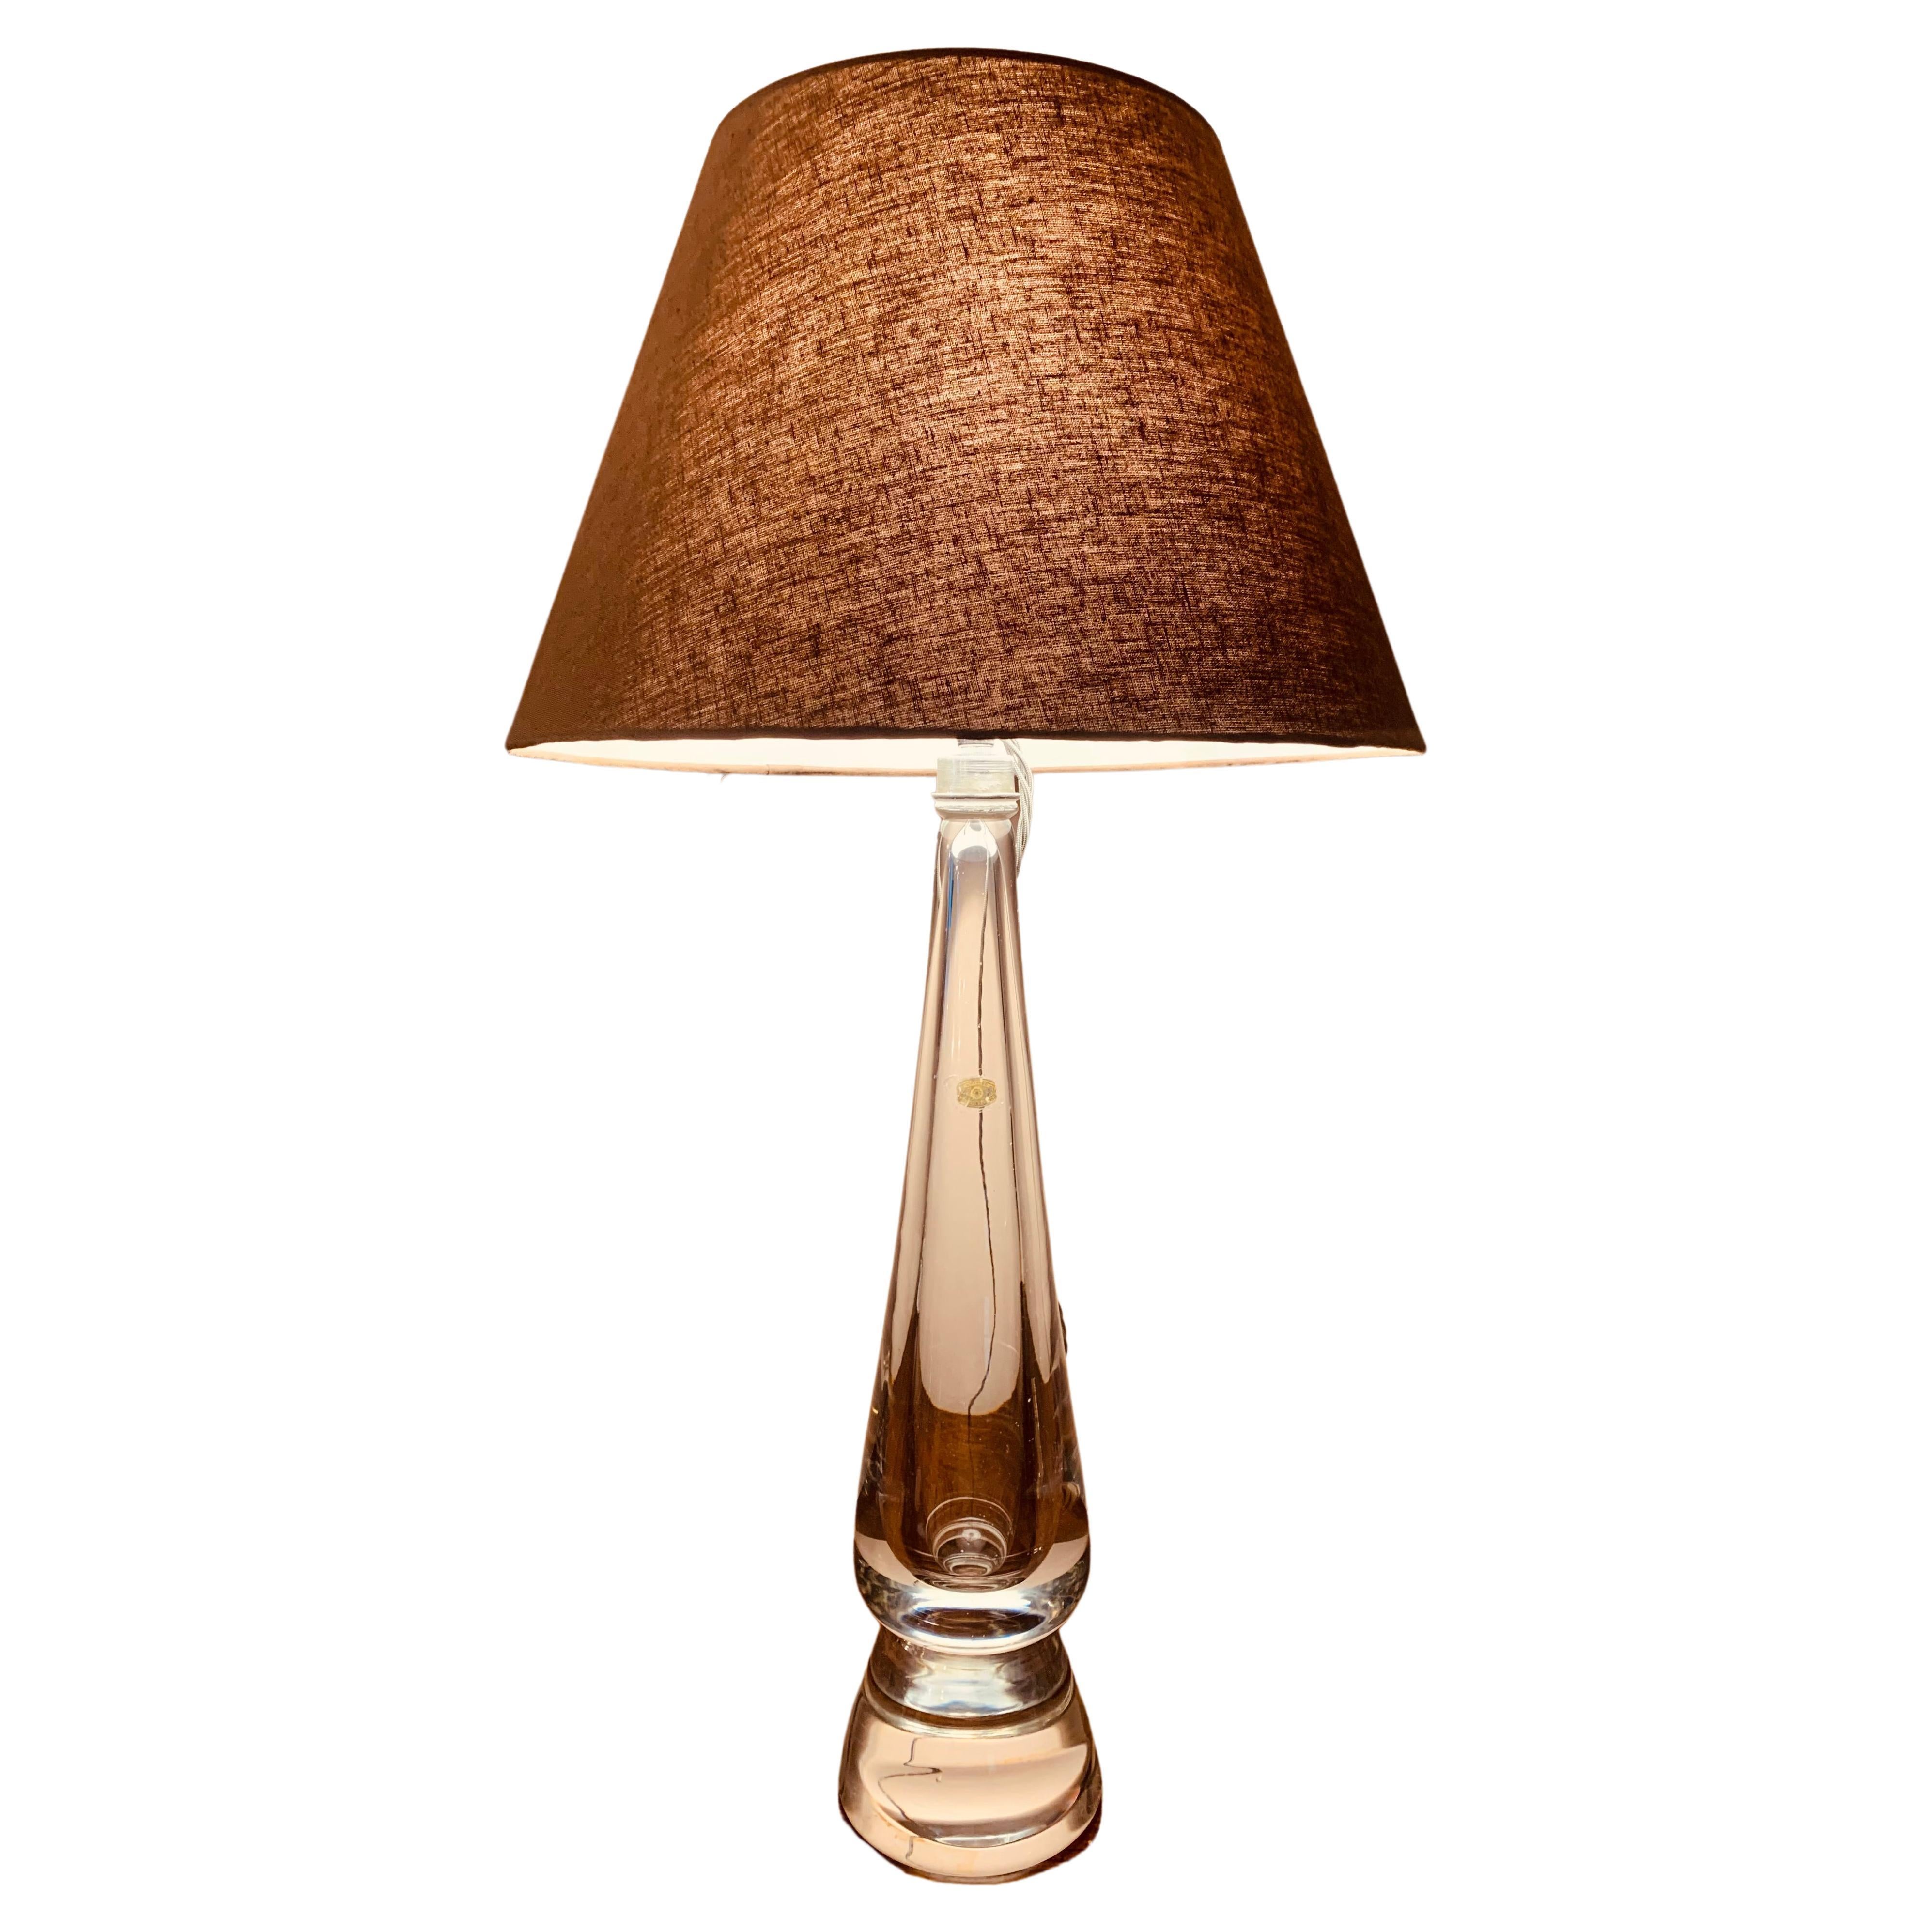 A large clear glass Belgium table lamp.  The conical base section is made from solid glass and is very heavy.  A small Val Saint Lambert original foil label has been sellotaped onto it, upside down, but having researched this design and from my own